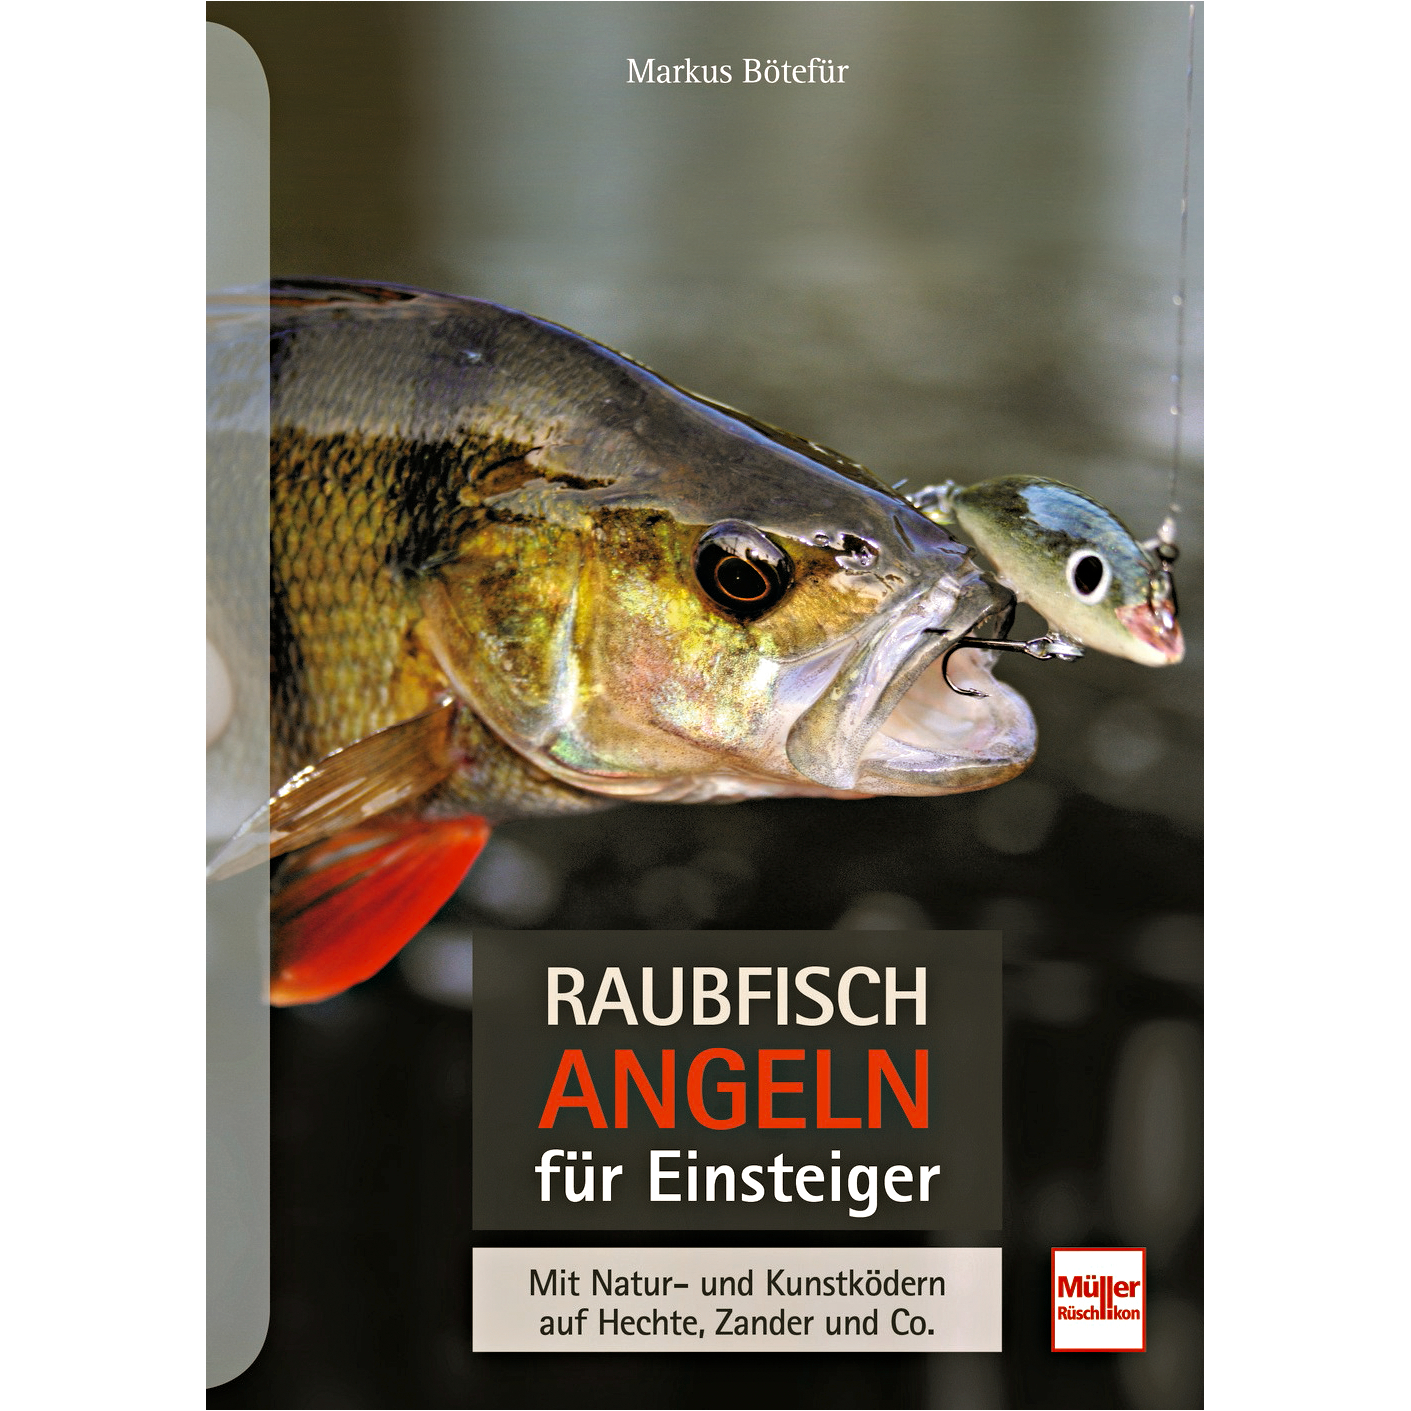 Predator fishing for beginners - With natural and artificial lures for  pike, zander and co. (German language) at low prices